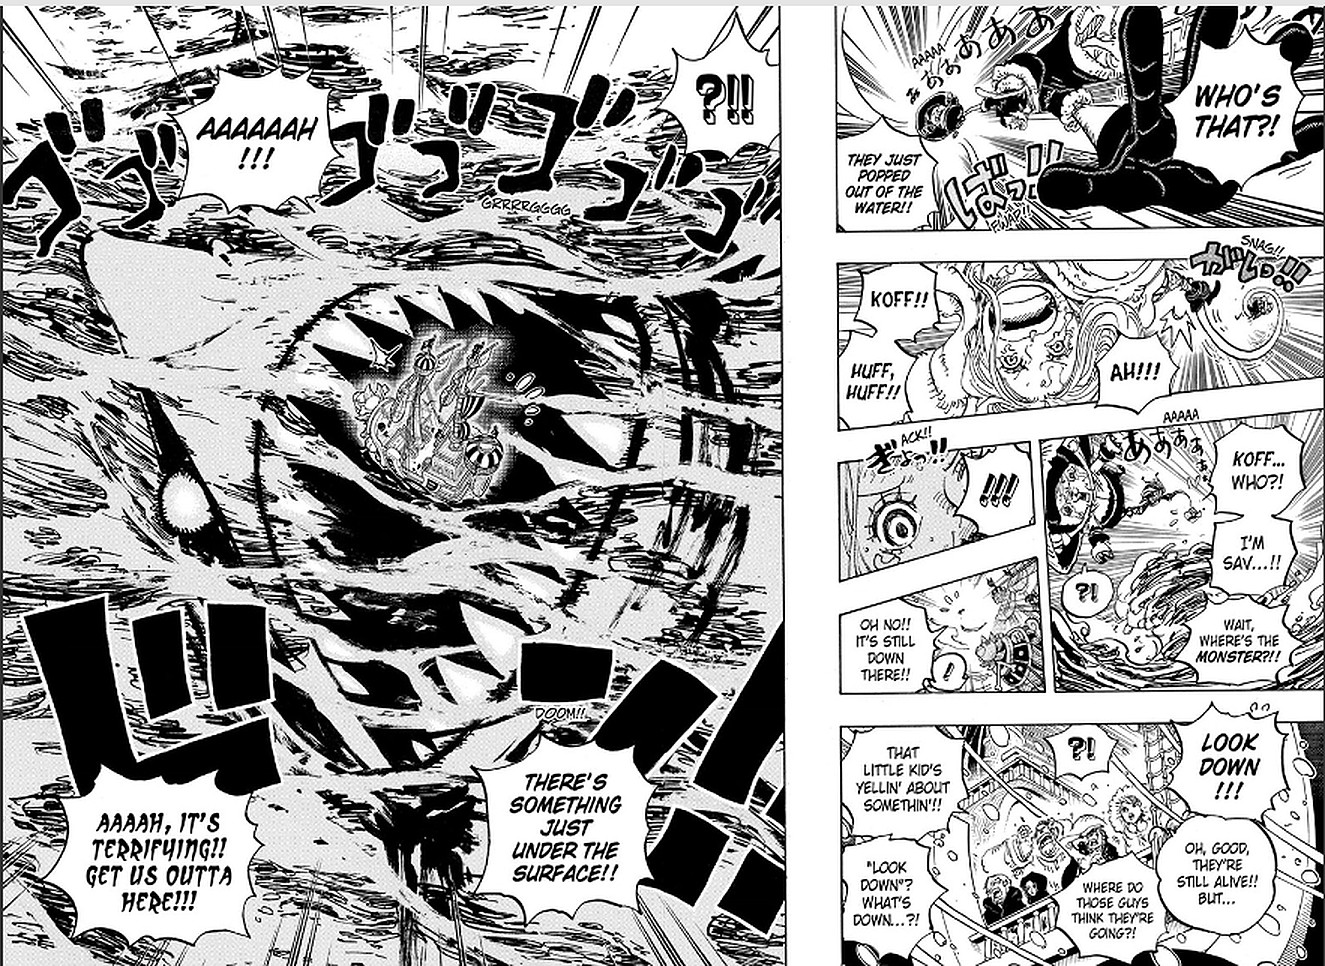 One Piece Chapter 1062 Review We Are Dr.Vegapunk!